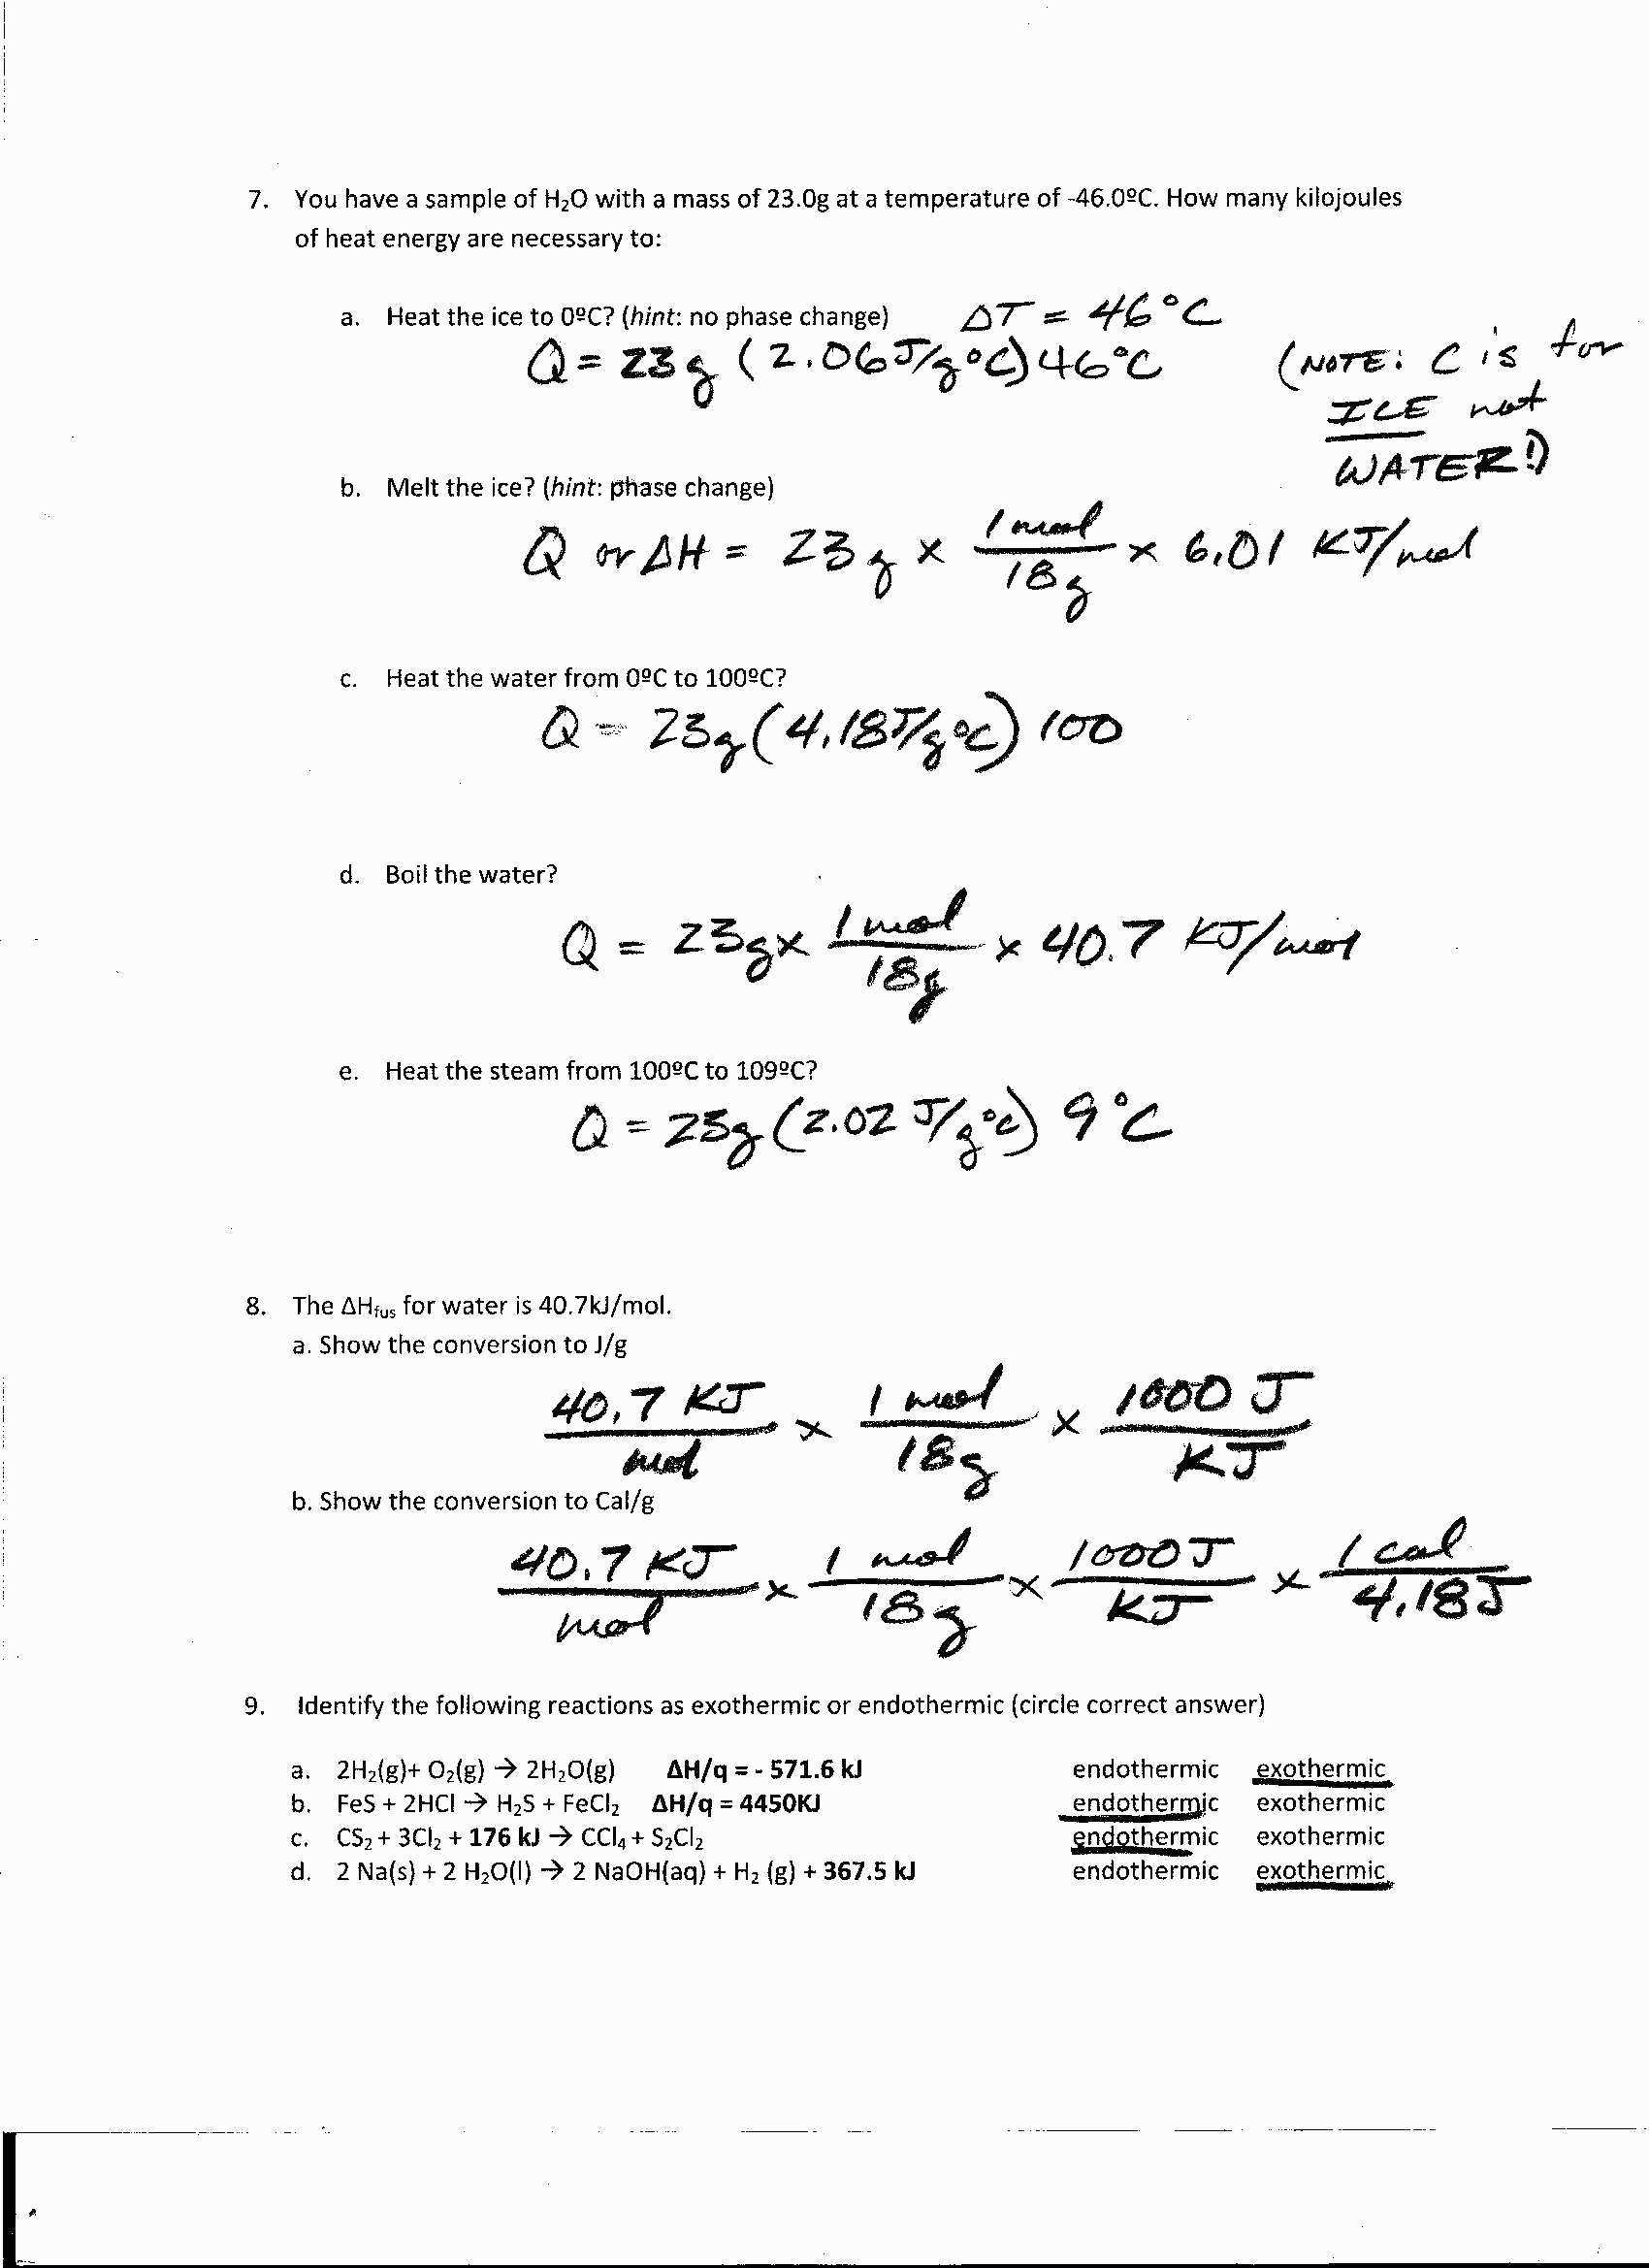 Heat Calculations Worksheet Answers as Well as 14 Lovely Worksheet Heat and Heat Calculations